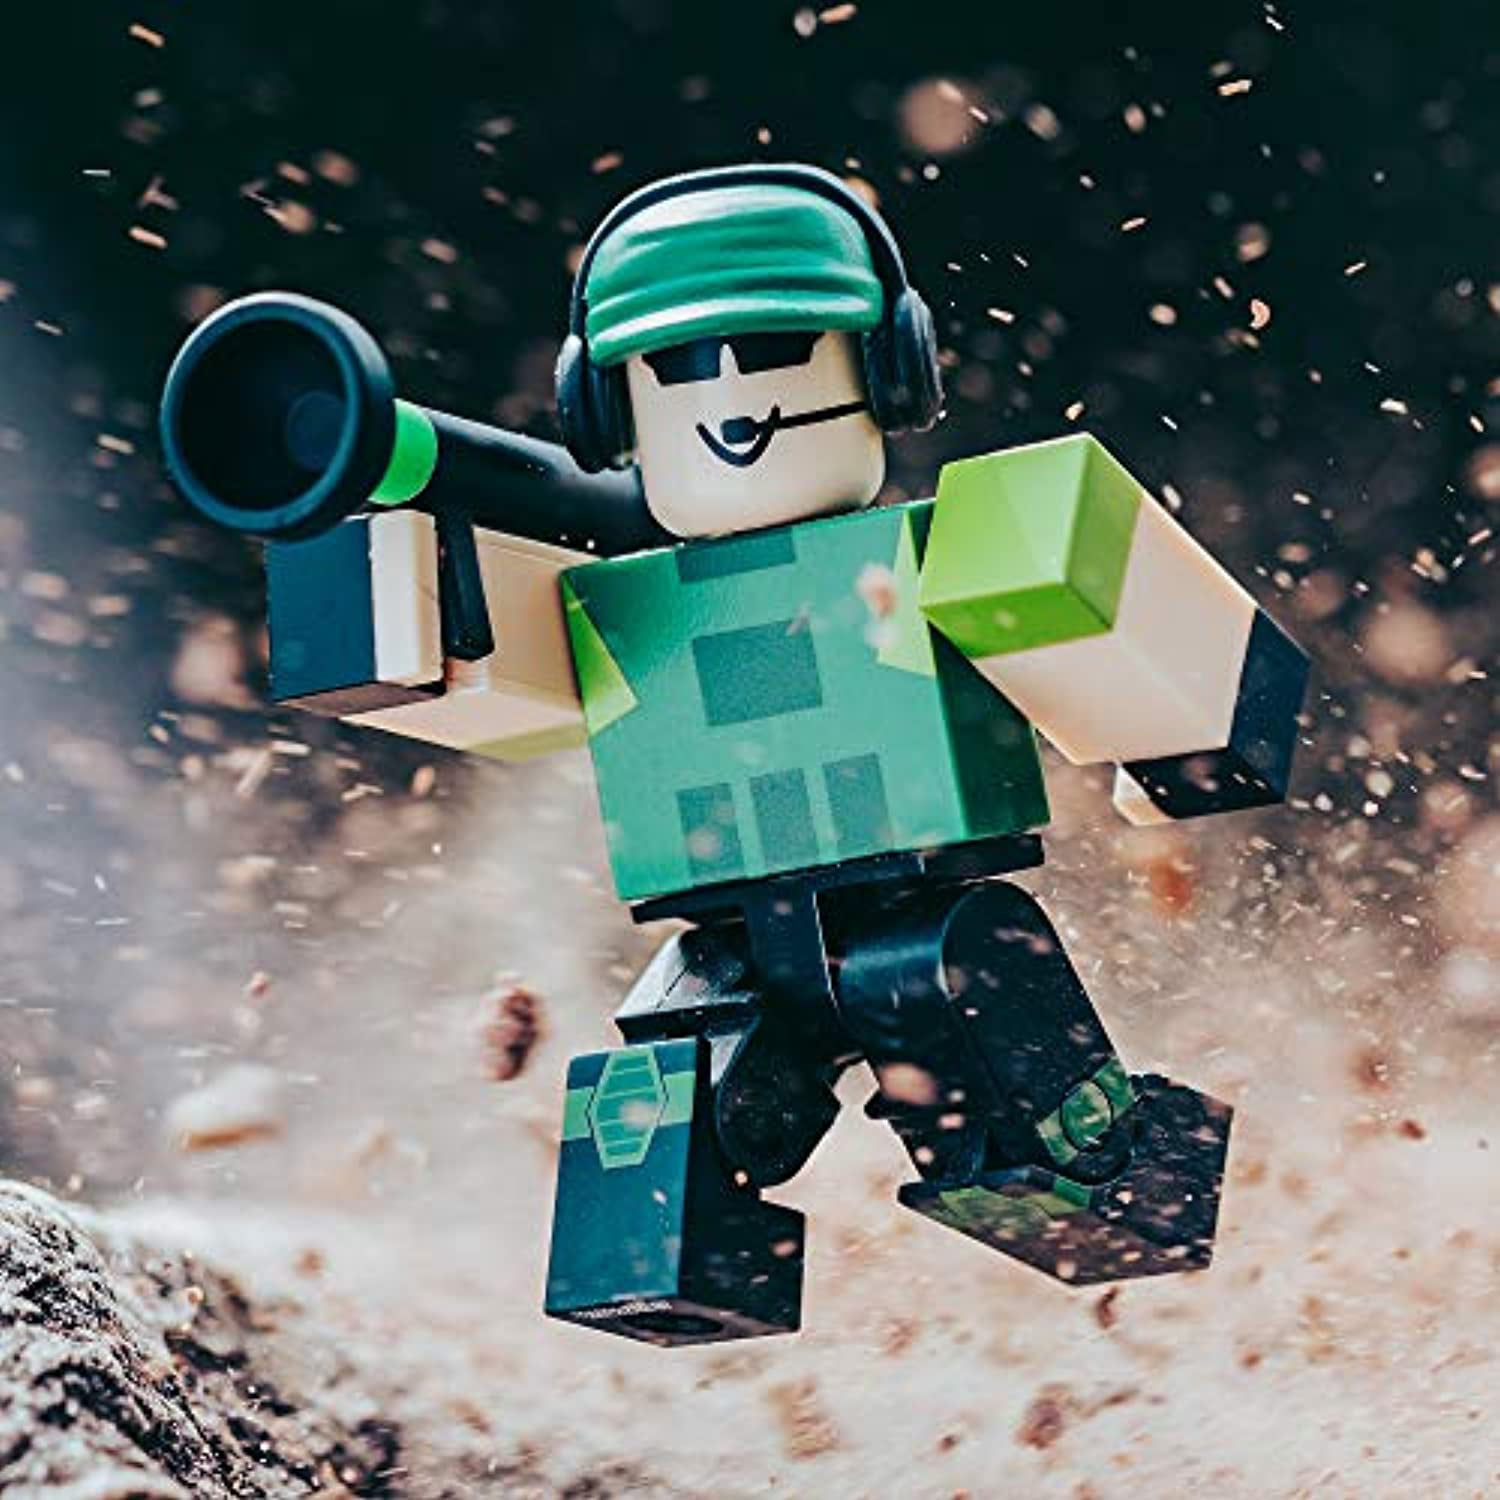  Roblox Action Collection - Tower Defense Simulator: Badlands  Heist Figure Pack + Two Mystery Figure Bundle [Includes 3 Exclusive Virtual  Items] : Toys & Games